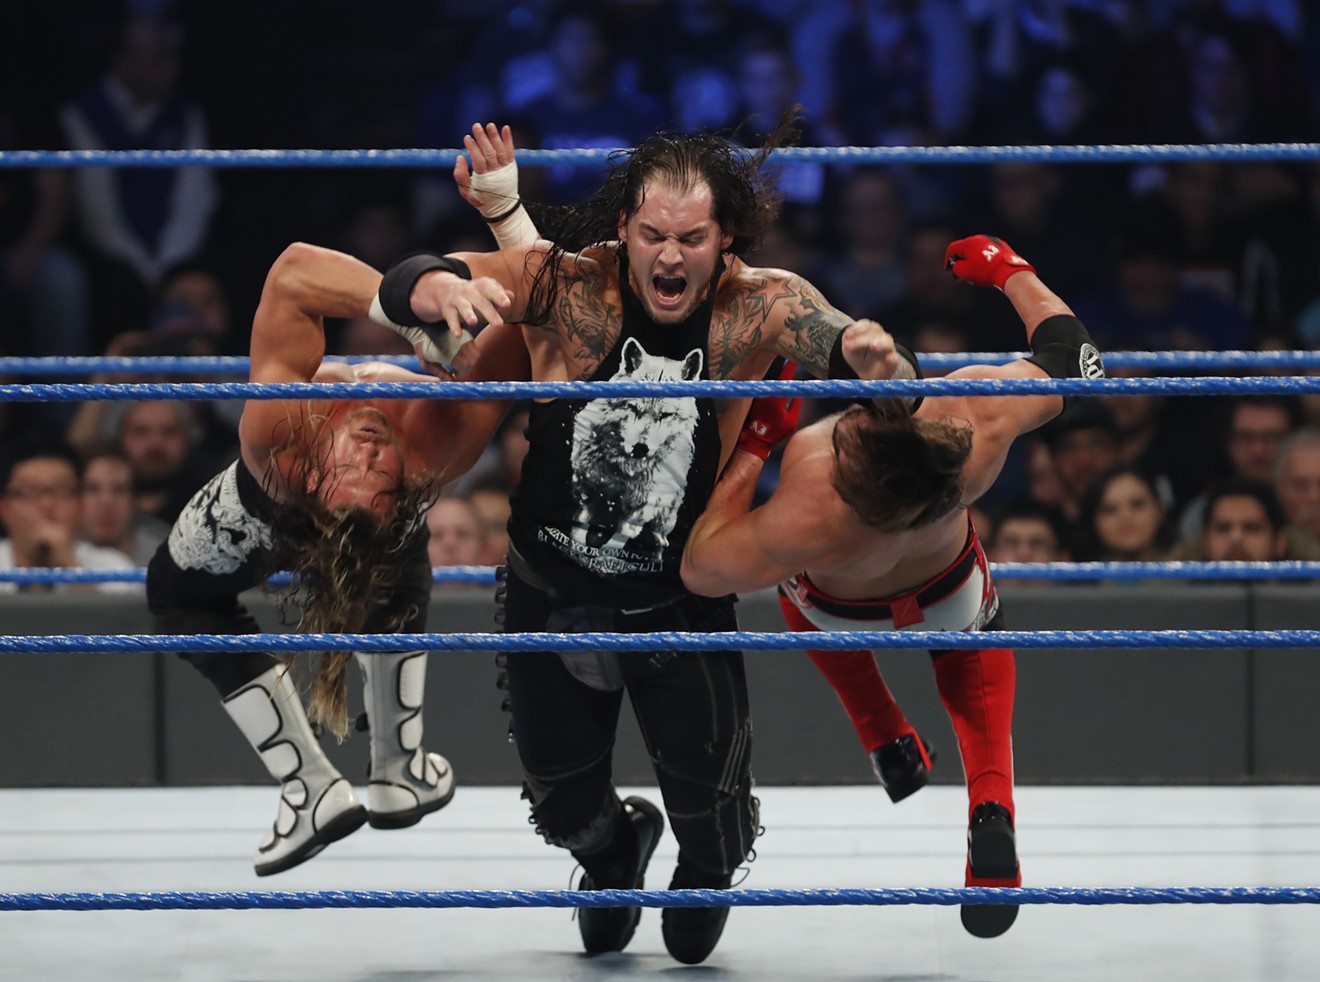 Baron Corbin clotheslines Dolph Ziggler and AJ Styles on an episode of SmackDown Live.